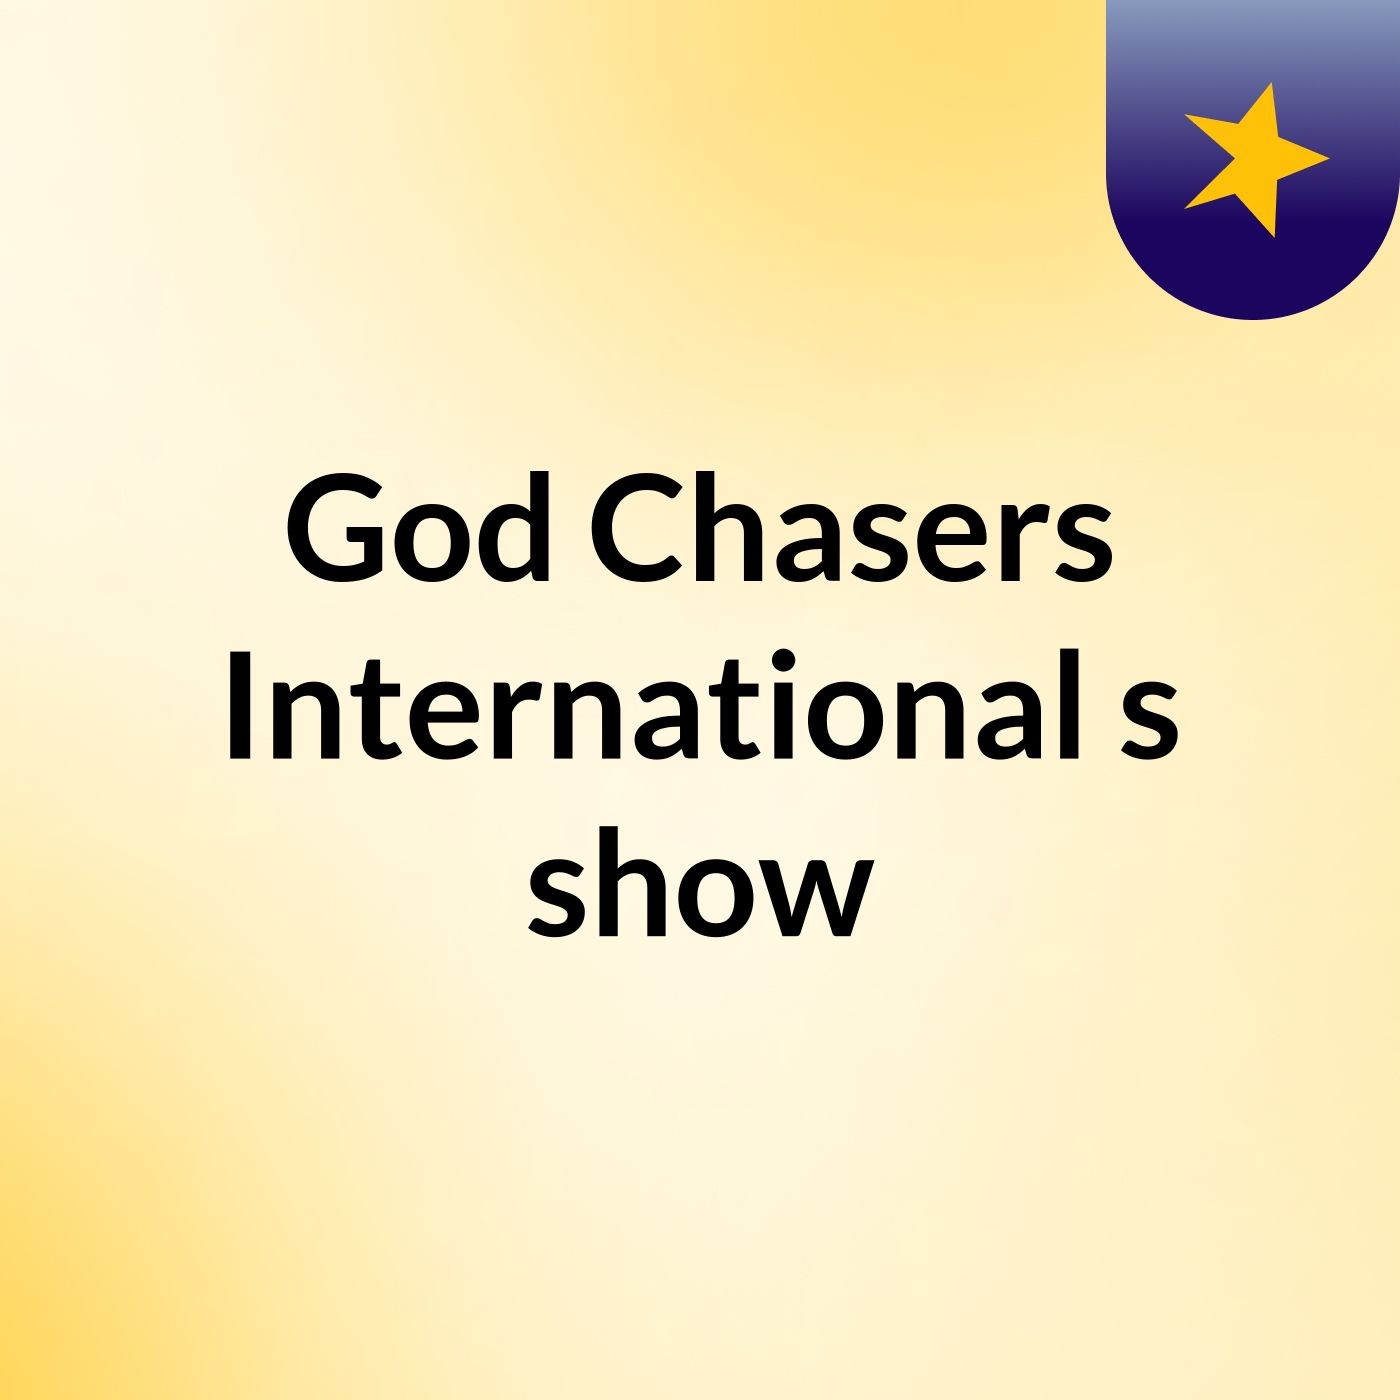 God Chasers International's show